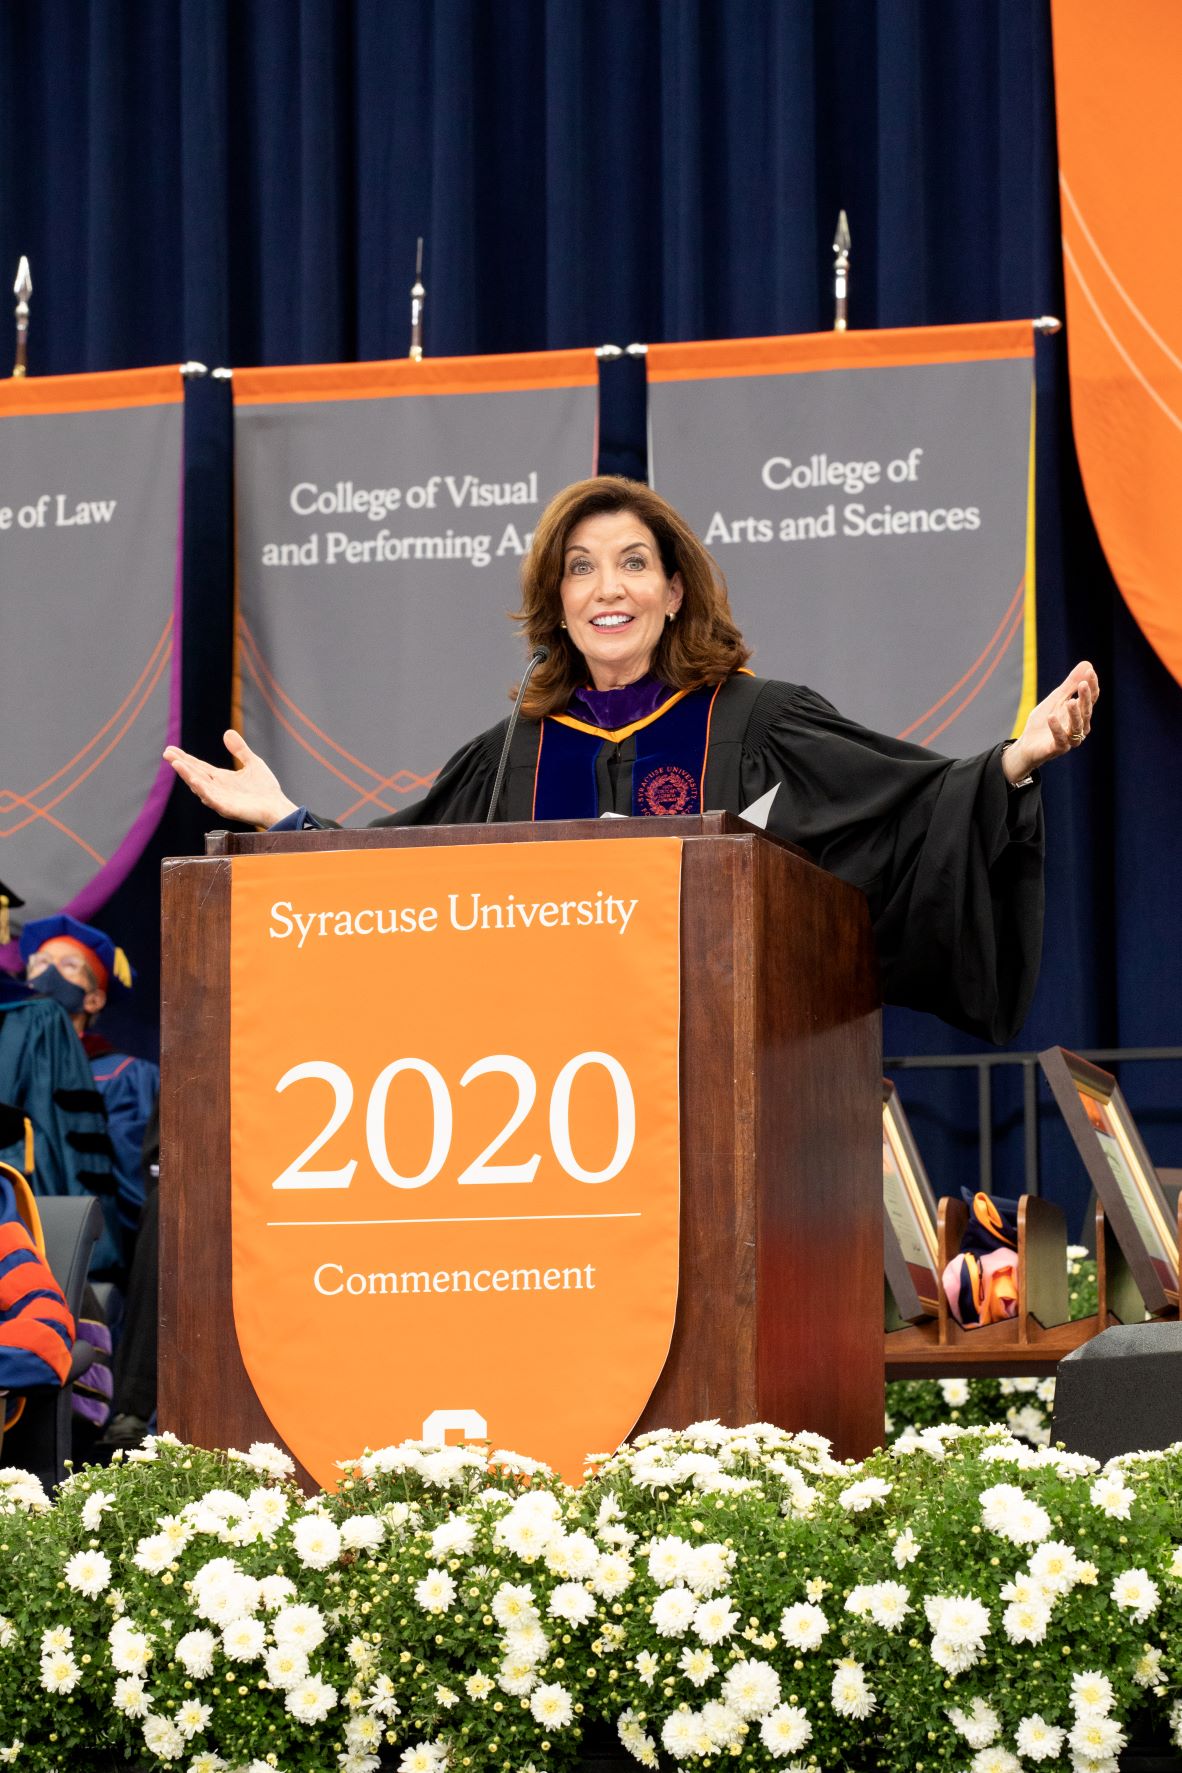 Woman at podium speaking during commencement ceremony